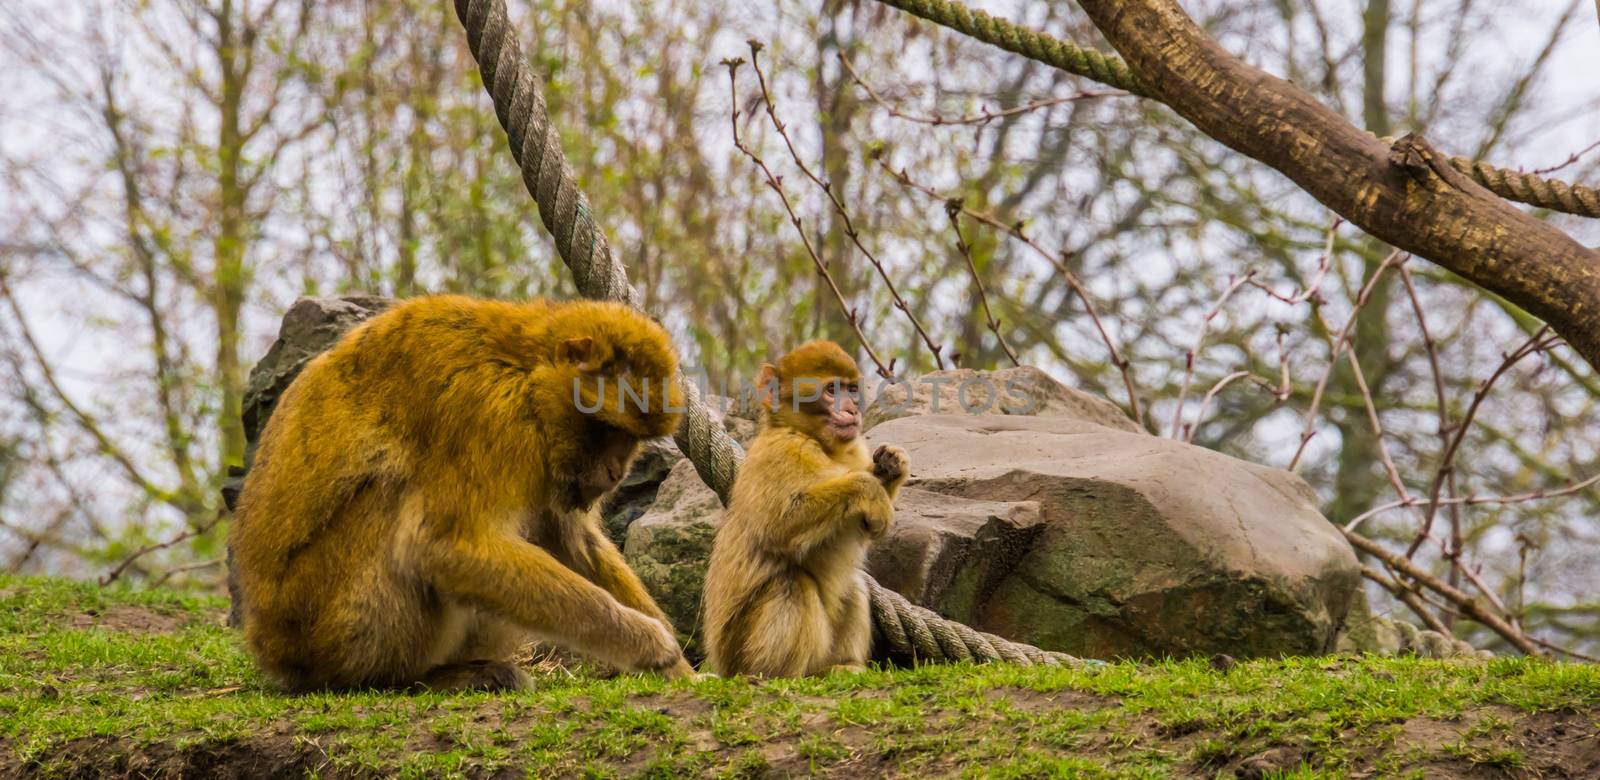 adorable young barbary macaque infant with its mother, Endangered animal specie from Africa